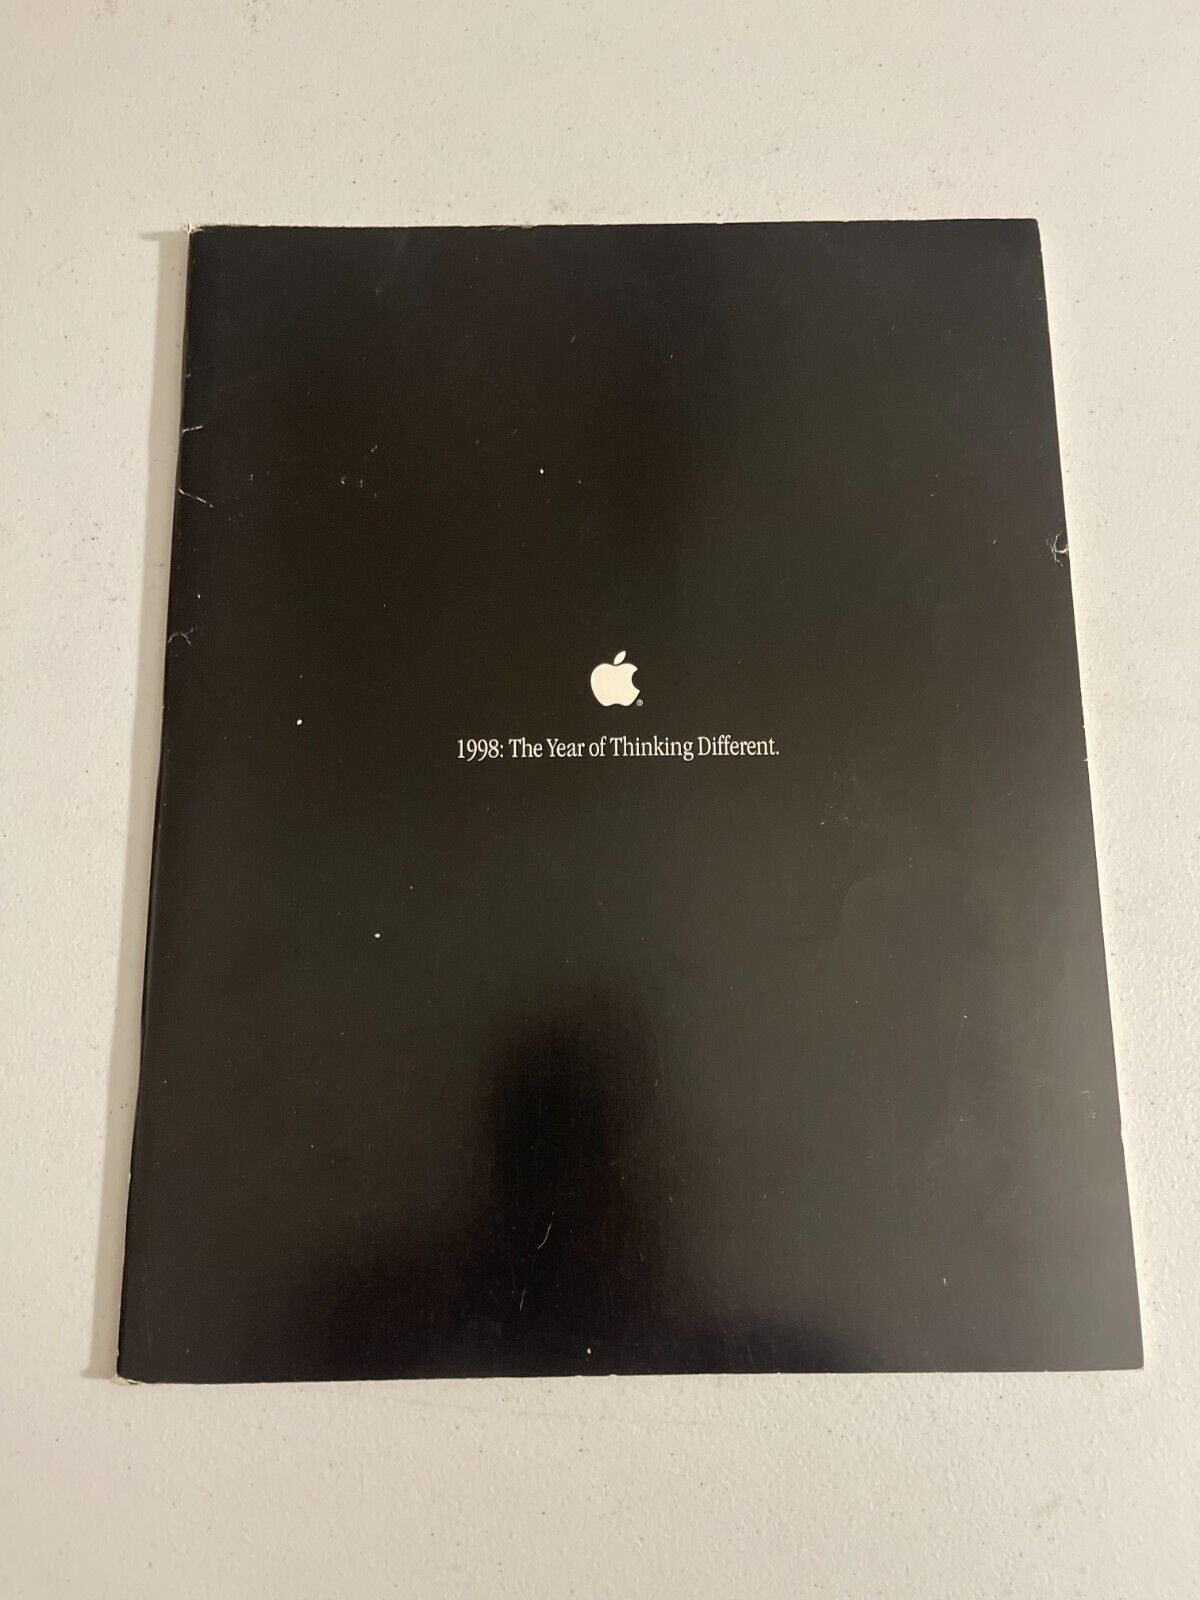 1998 THE YEAR OF THINKING DIFFERENT RARE INTERNAL APPLE COMPUTERS LIMITED BOOK